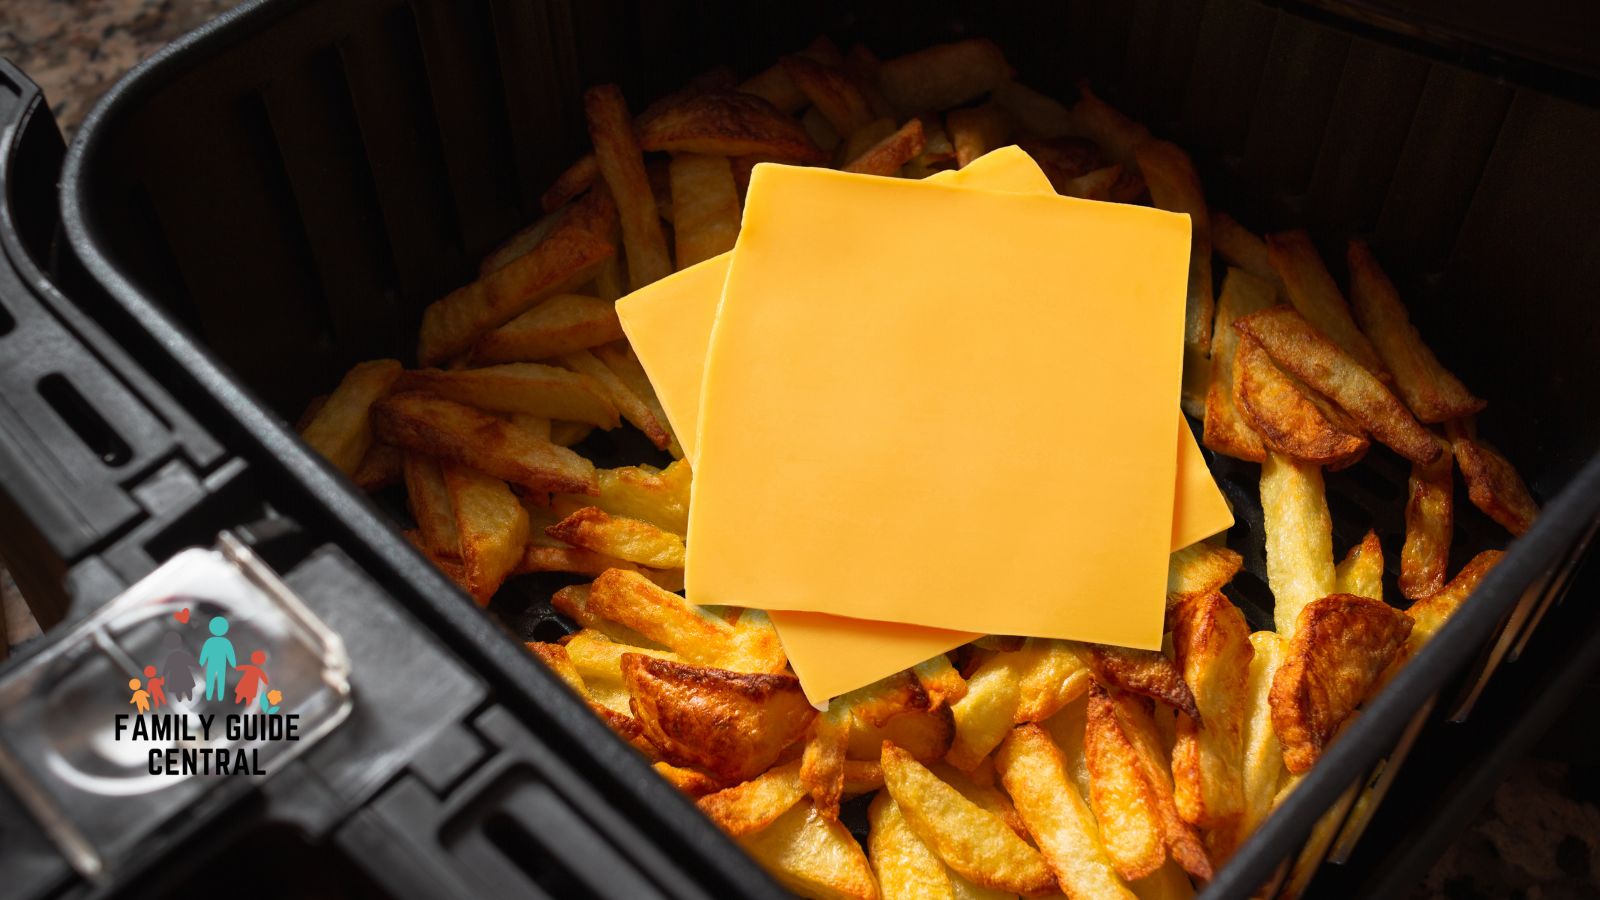 Melting cheese in the air fryer - familyguidecentral.com